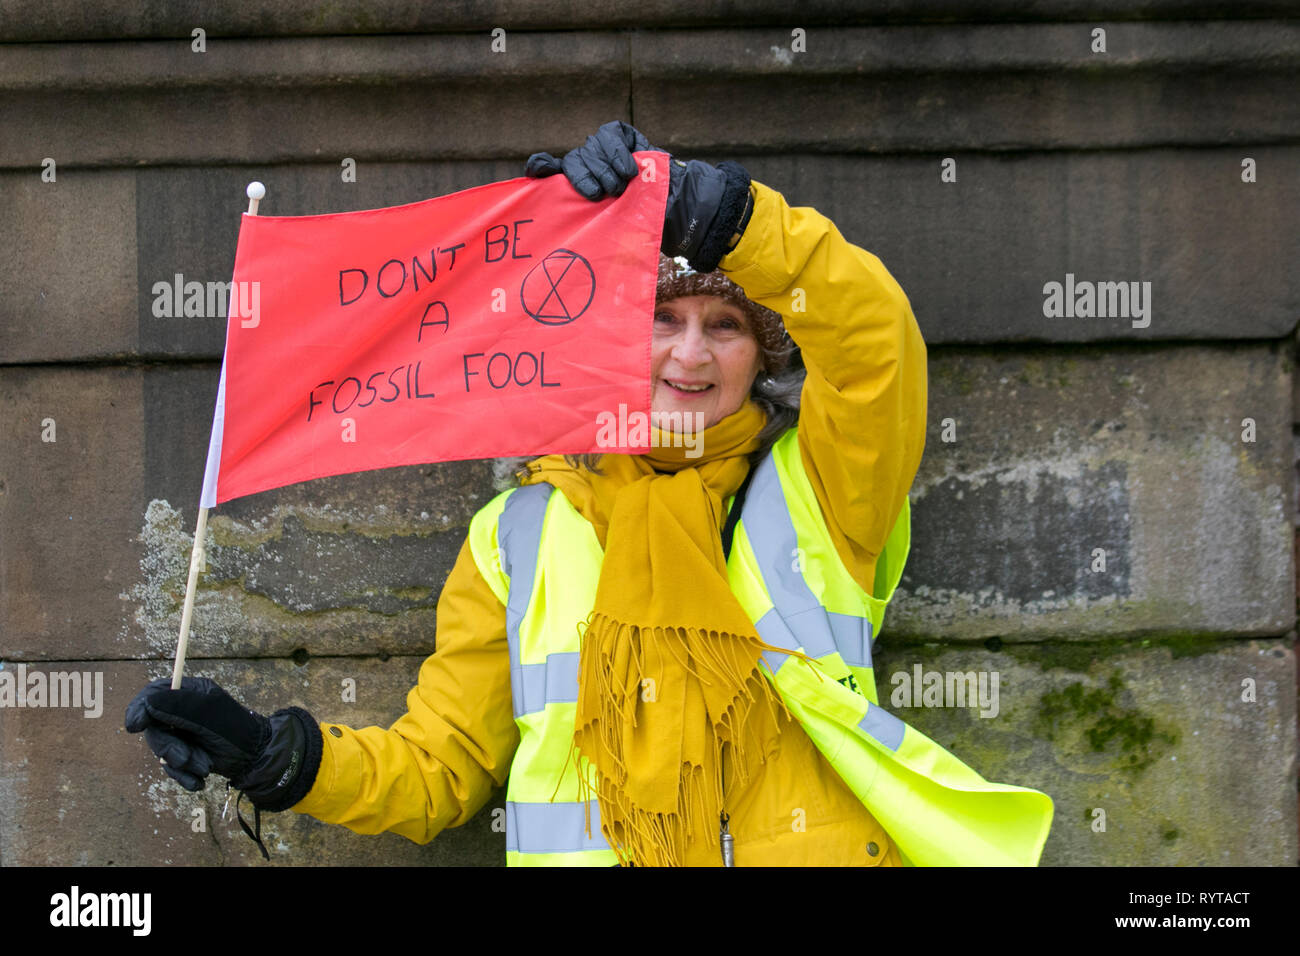 Preston, Lancashire. 15th March, 2019. Pauline waving a red flag 'Don't be a fossil fool' at the School strike 4 Climate change, as parents and school children assemble outside the railway station with banners and placards protesting for action against climate change.  The demonstrators marched through the city centre to continue their protest at the Flag Market in the city centre. Children from around Lancashire have walked out of classes today as part of an international Climate Strike. Credit:MWI/AlamyLiveNews Stock Photo